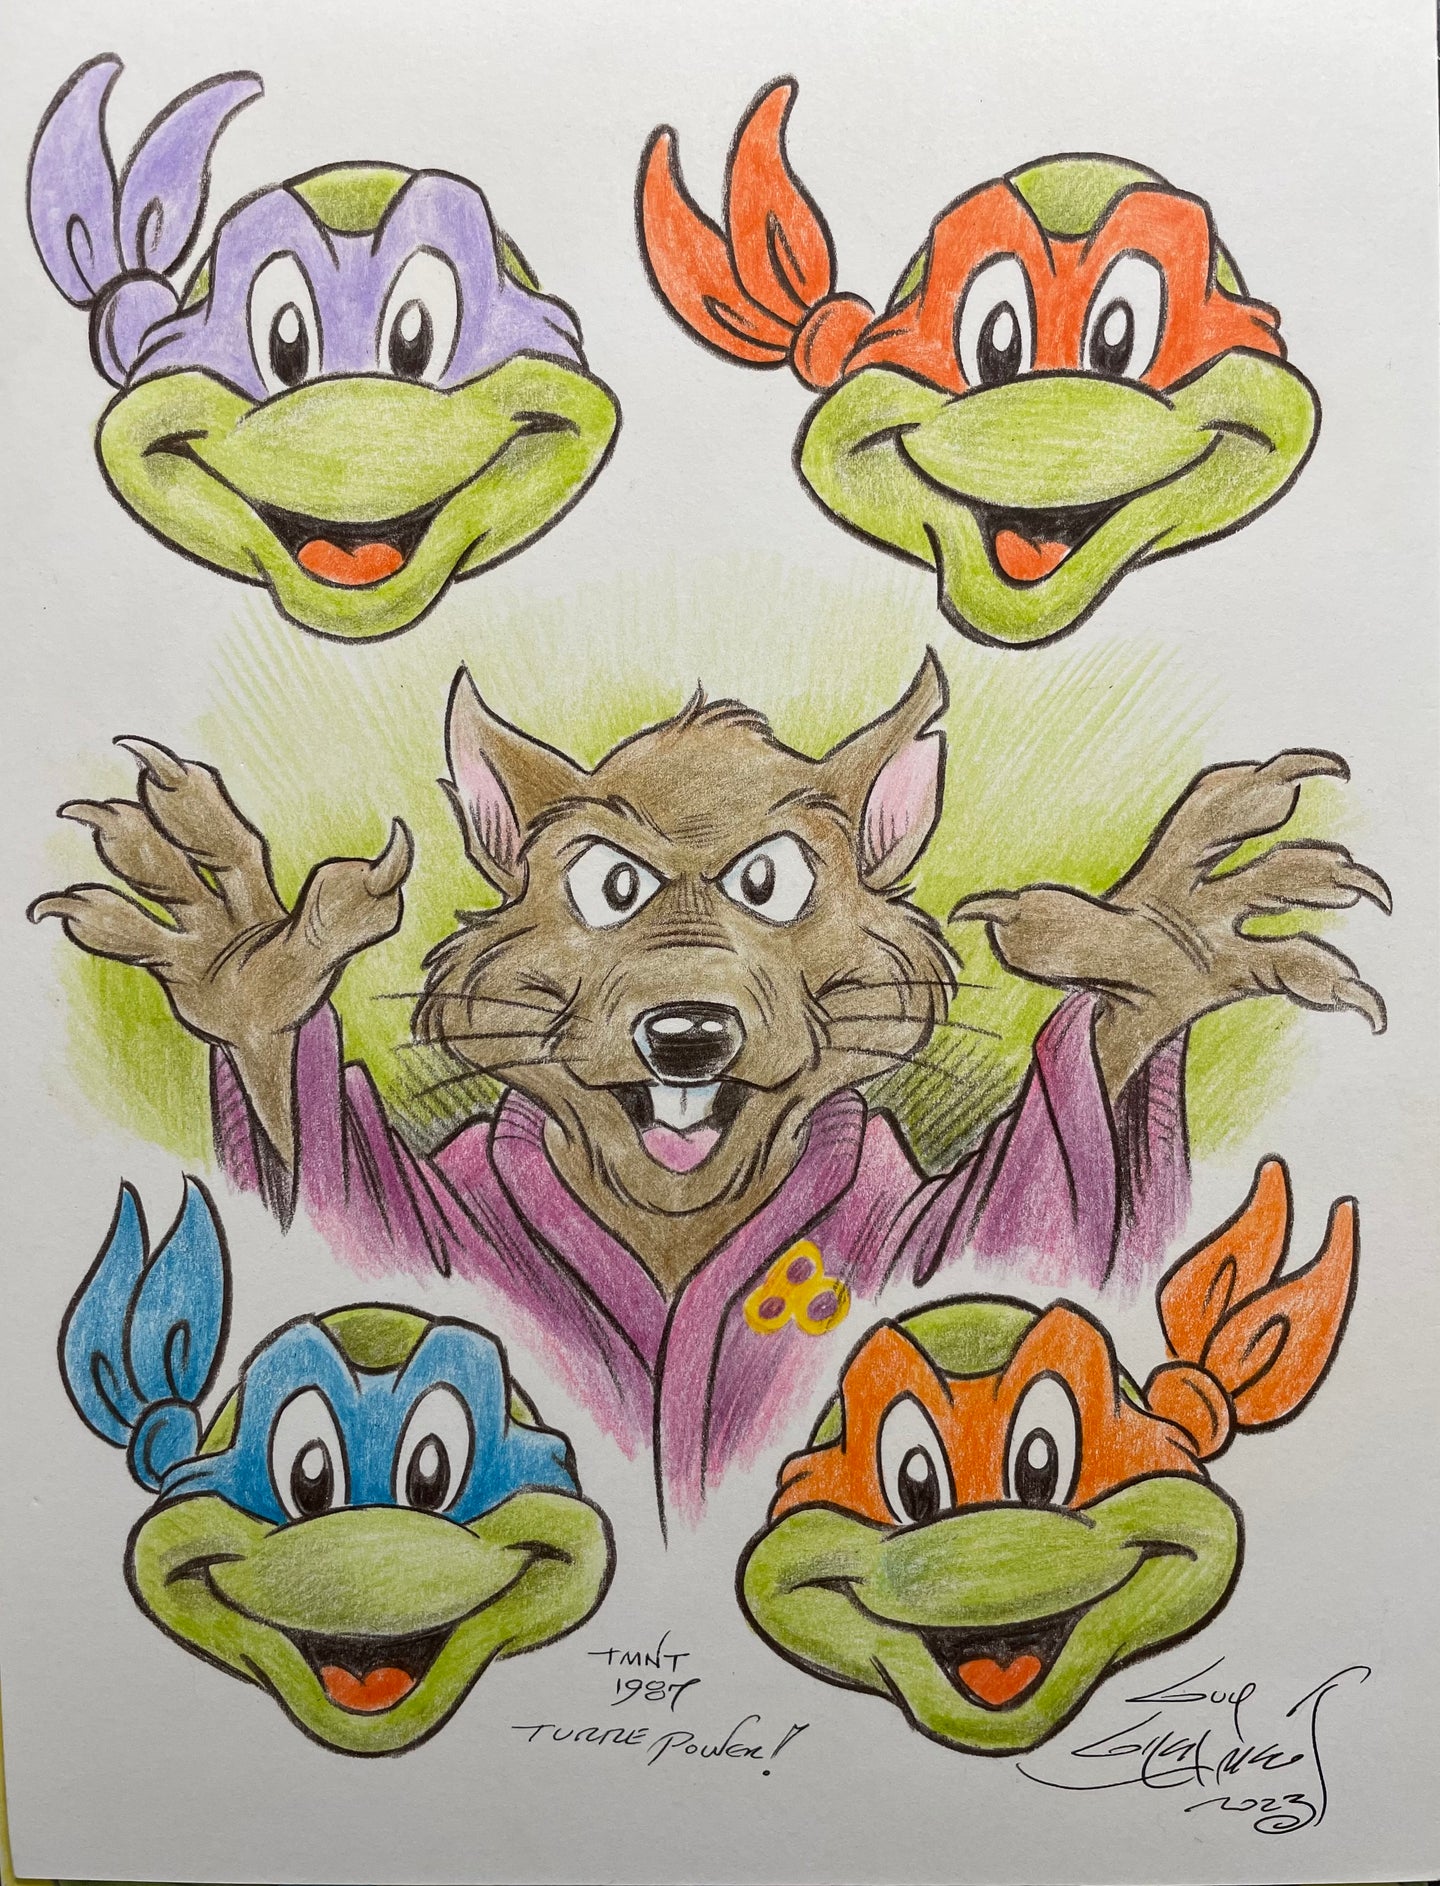 Master Splinter and the Boys Original Art 8.5x11 Sketch  - Created by Guy Gilchrist